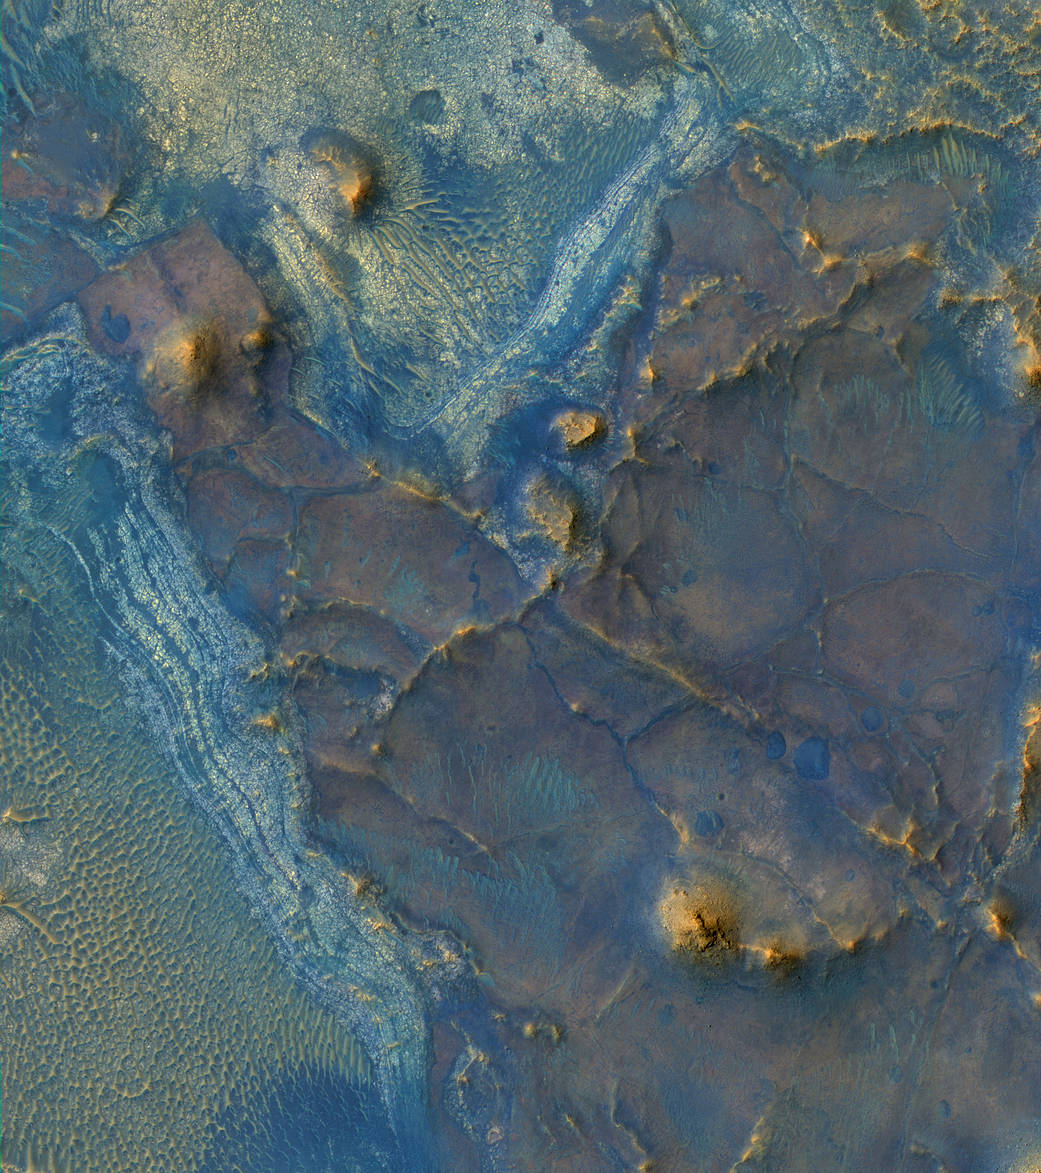 Colorful Mars terrain imaged from orbit